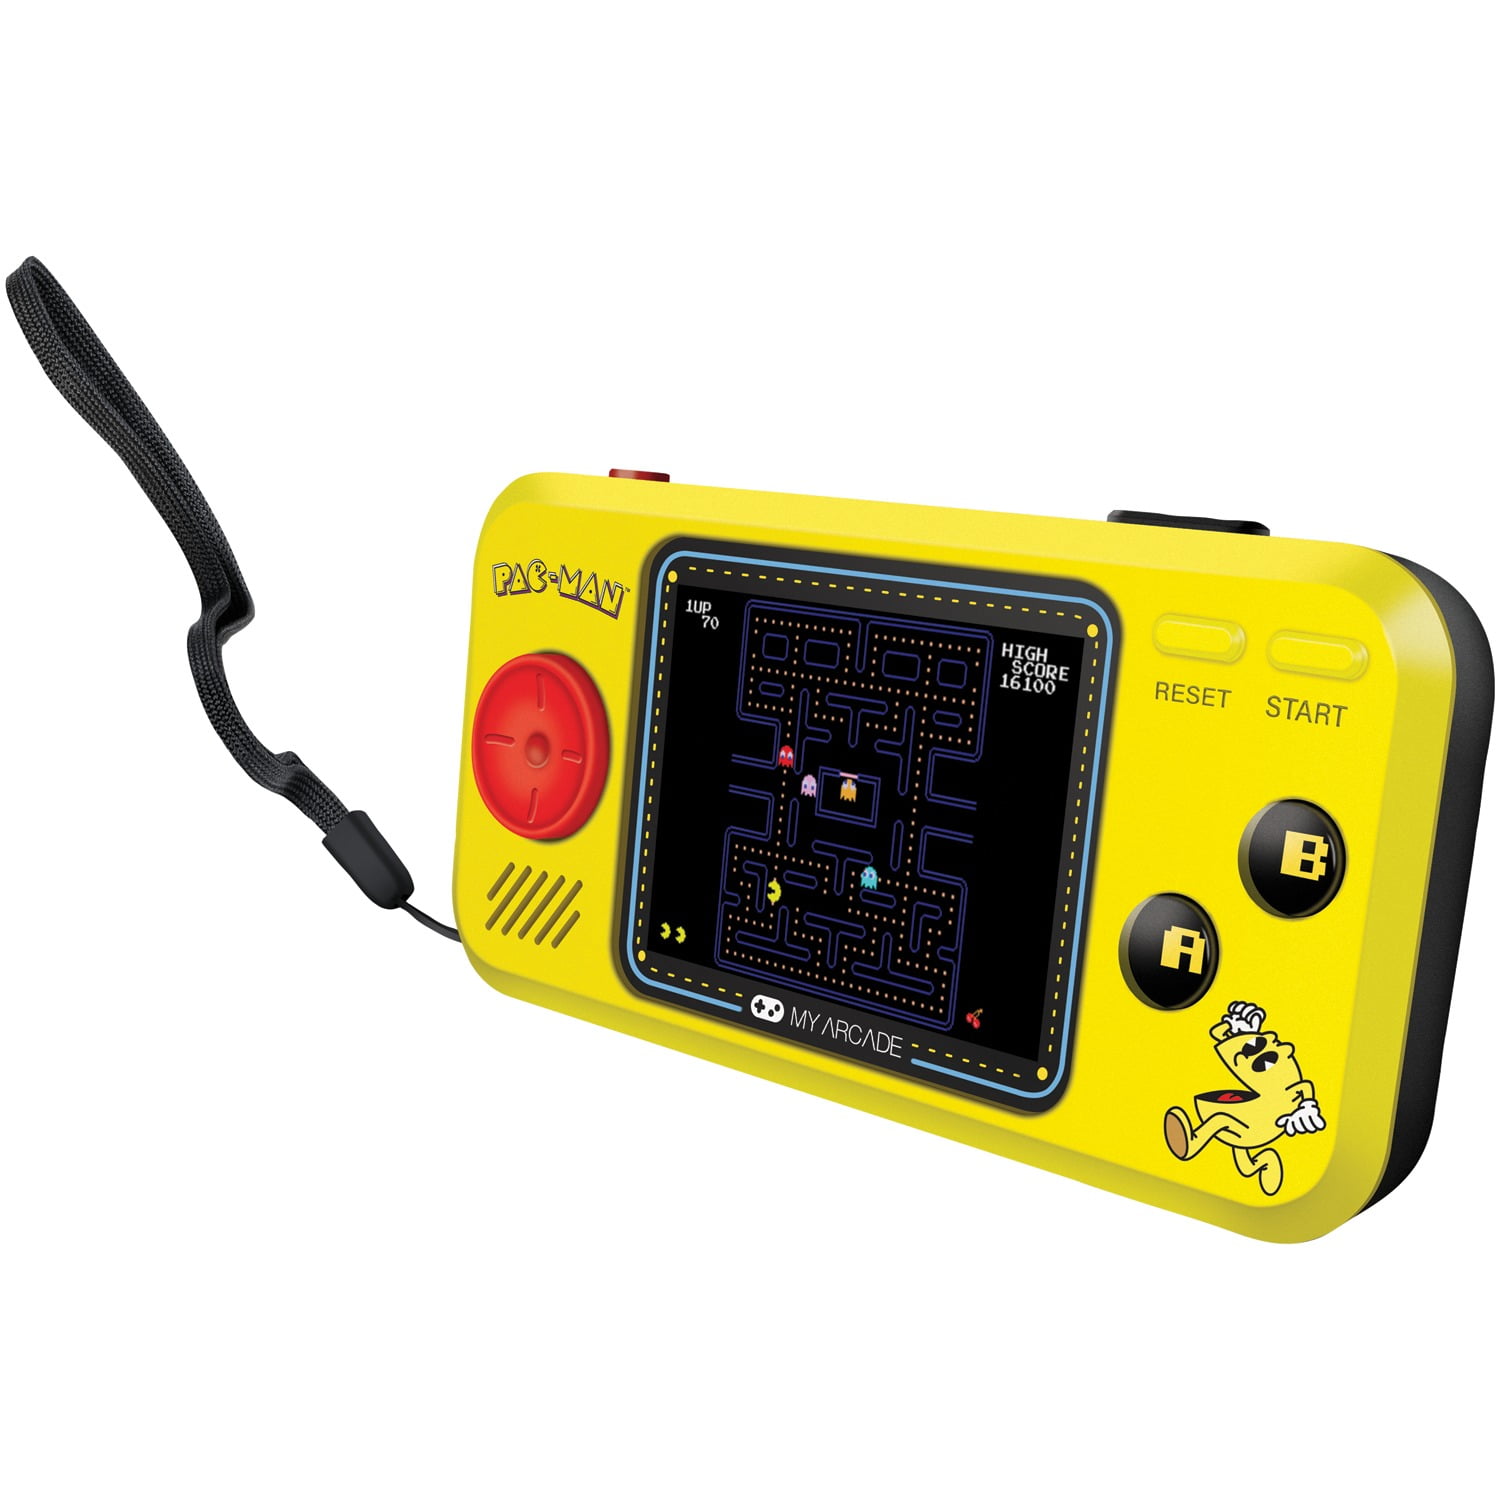 Pac-Man, Pac-Panic, Pac-Mania for sale online - 0845620032273 MyArcade Pac-Man Pocket Player Handheld Game Console 3 Built-In Games DRMDGUNL3227 